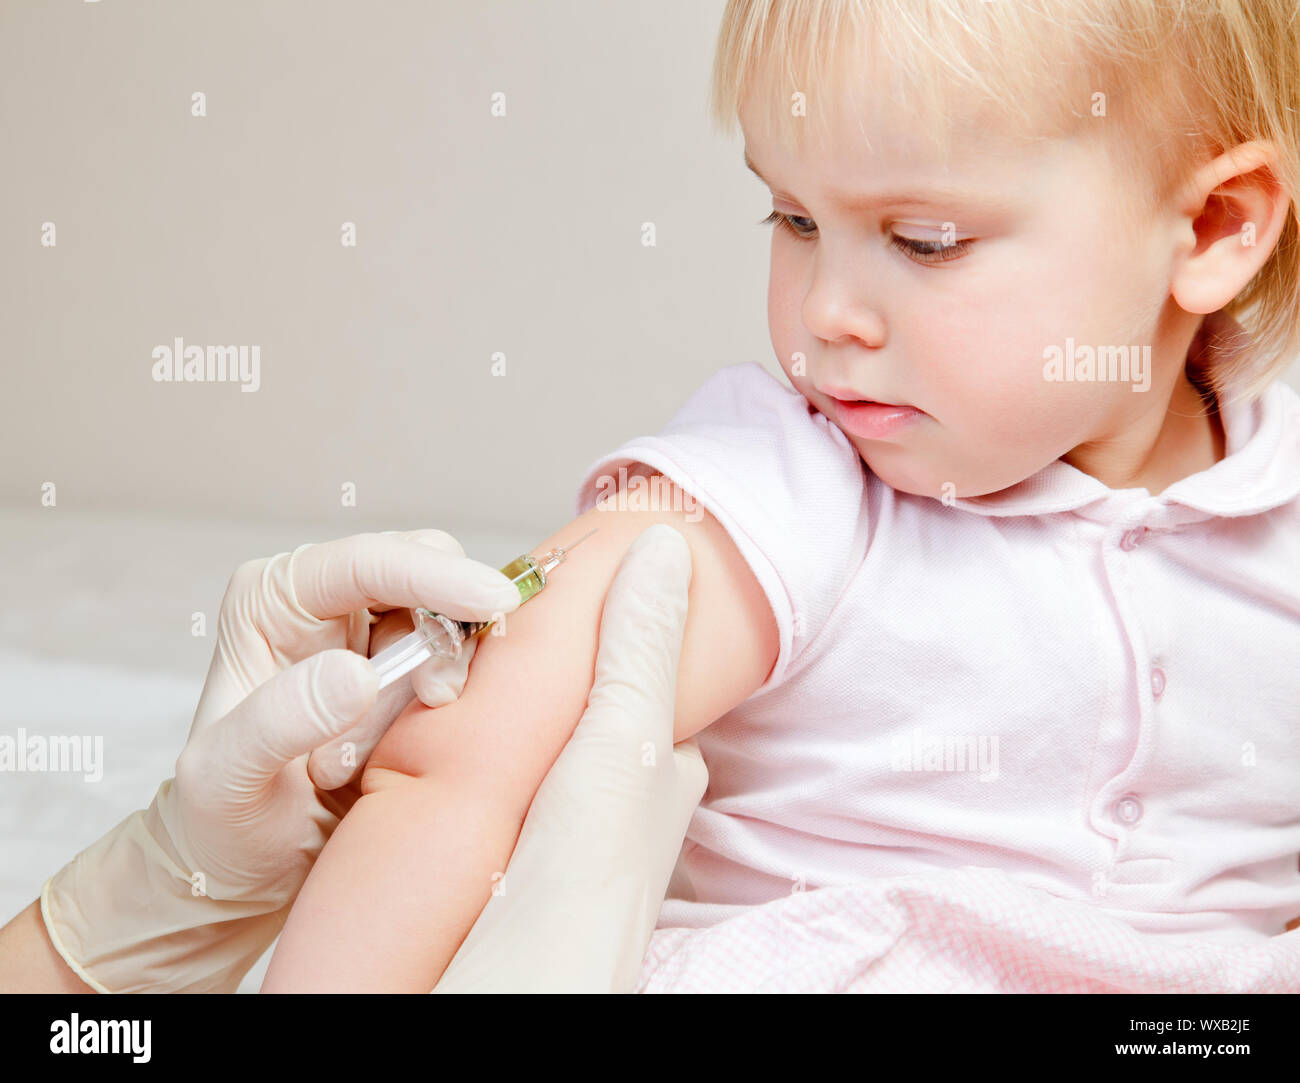 Doctor giving a child an intramuscular injection in arm Stock Photo